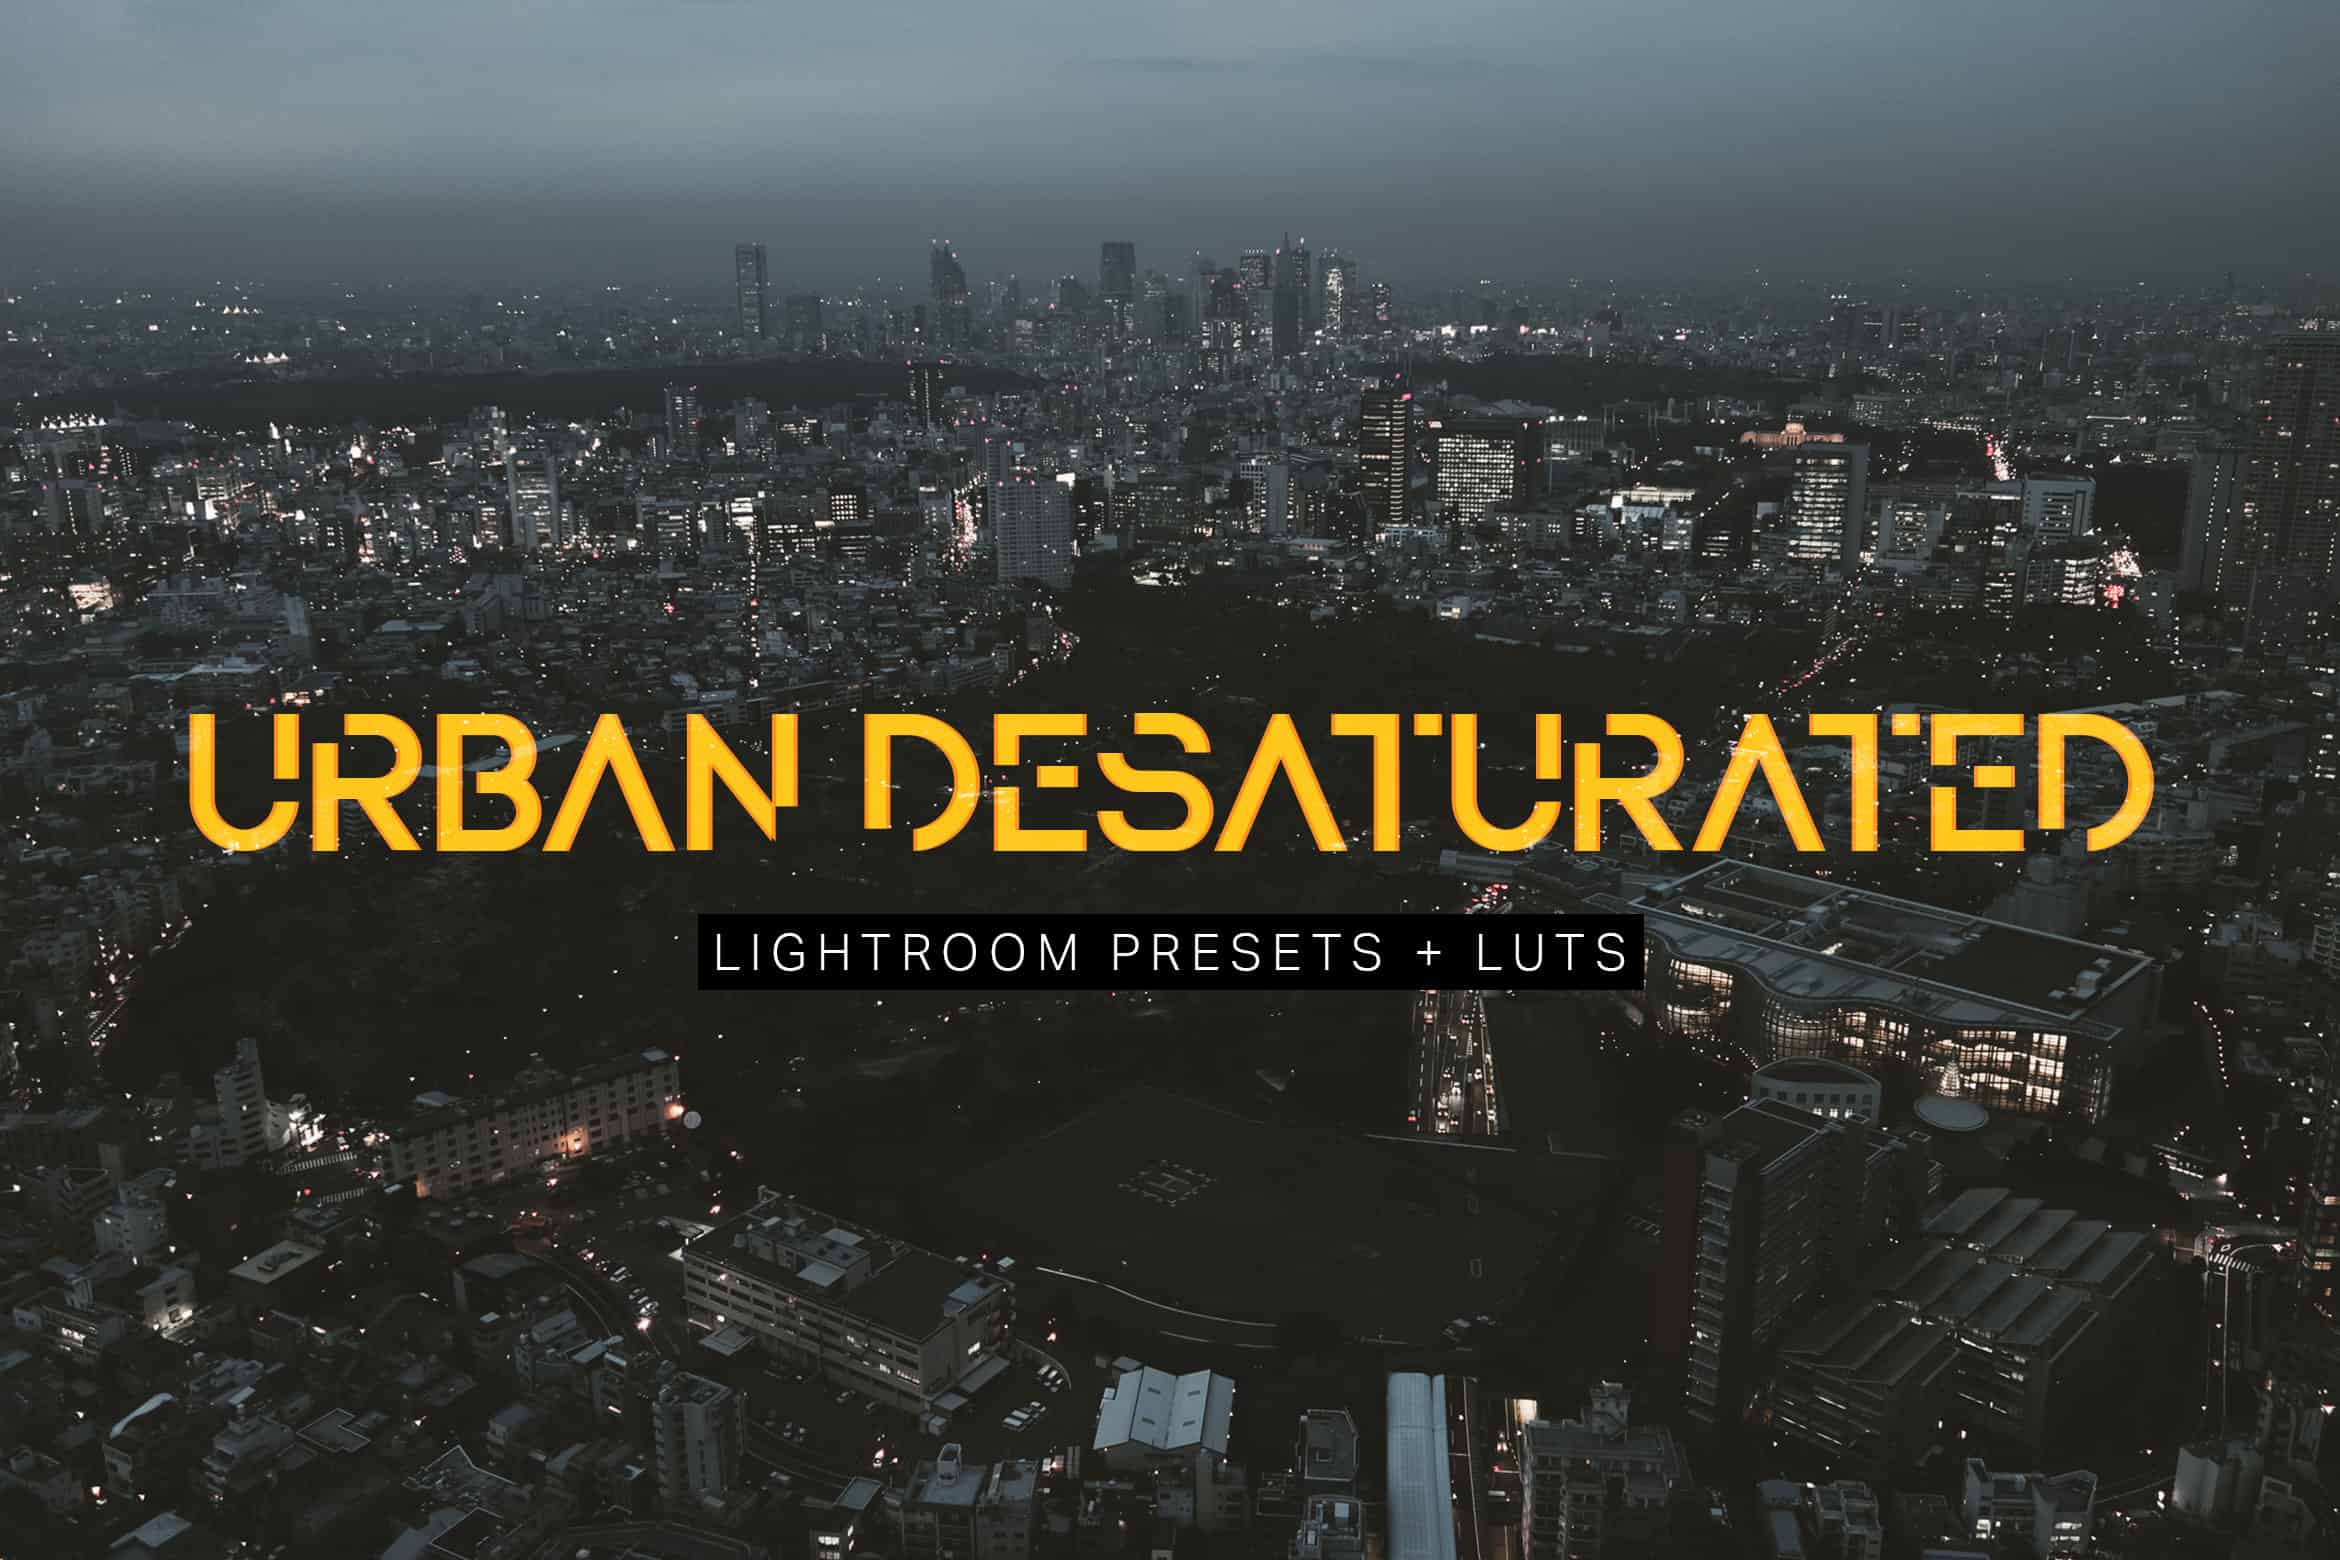 Urban Desaturated Lightroom Presets and LUTs